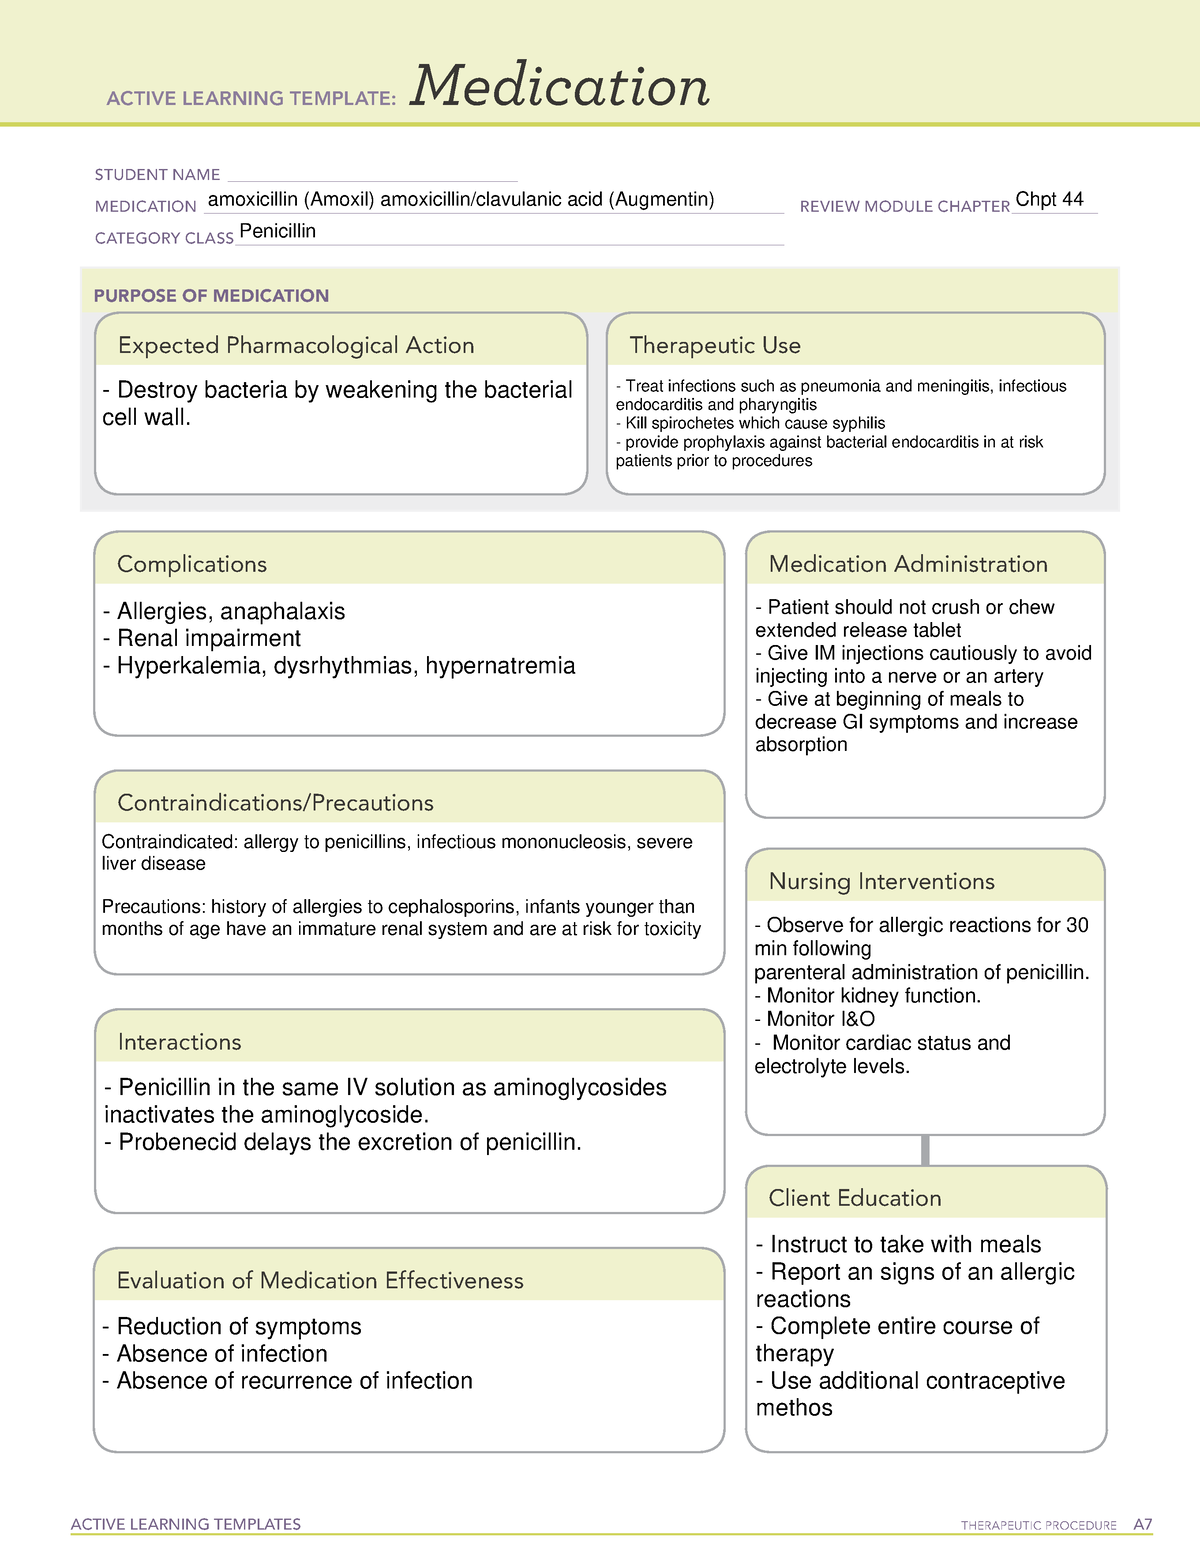 Amoxicillin and Augmentin ACTIVE LEARNING TEMPLATES THERAPEUTIC